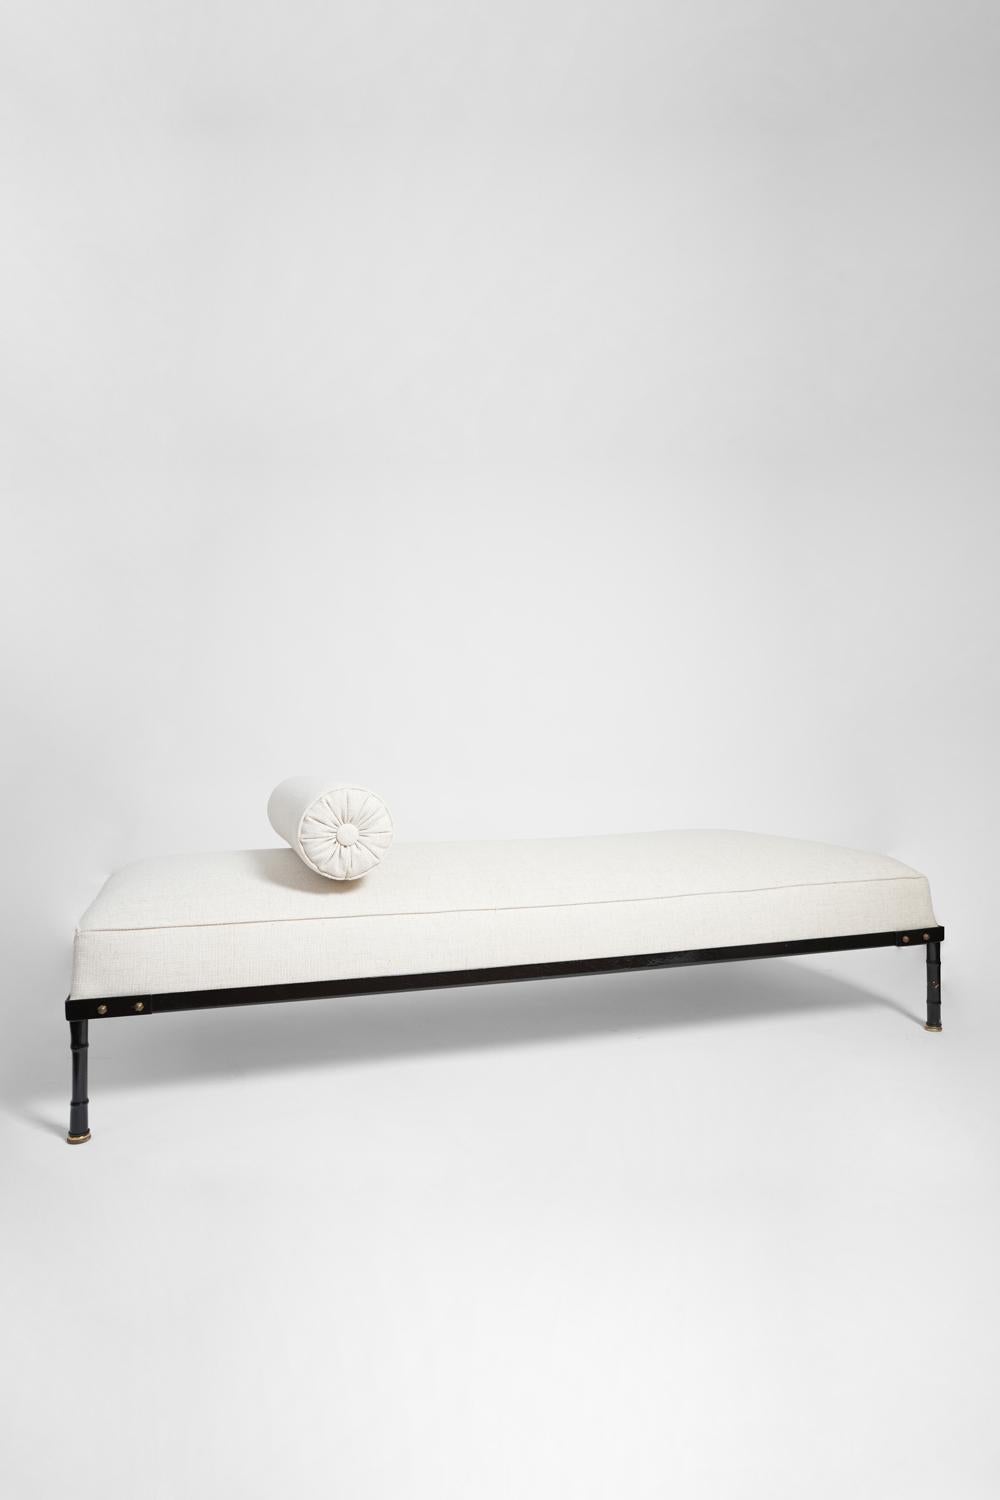 French  Iron and brass faux bamboo daybed, 1960s.